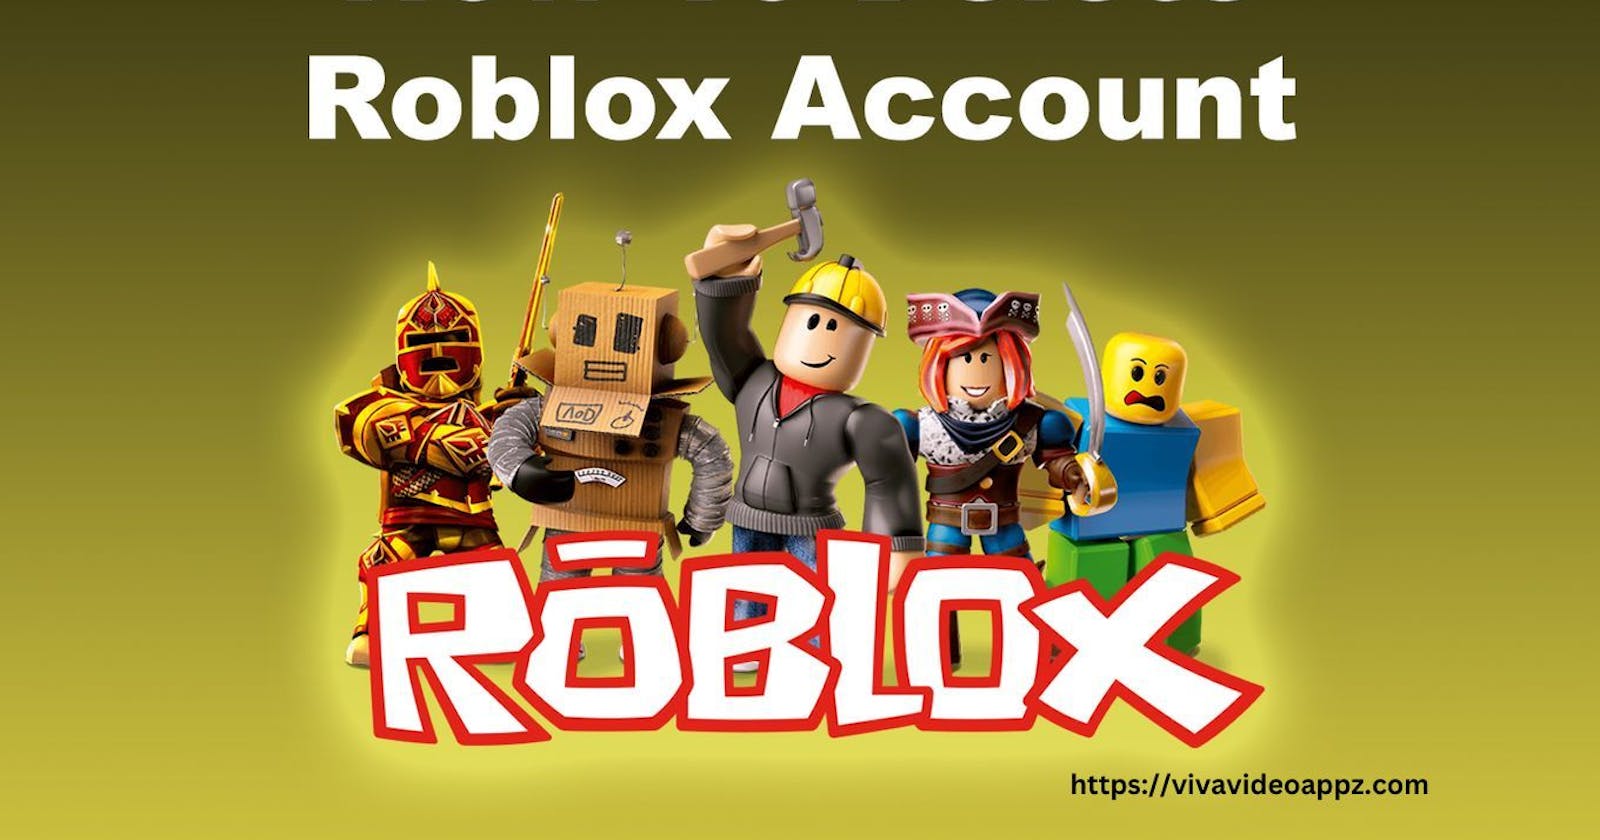 A Clean Slate: How to Delete Your Roblox Account